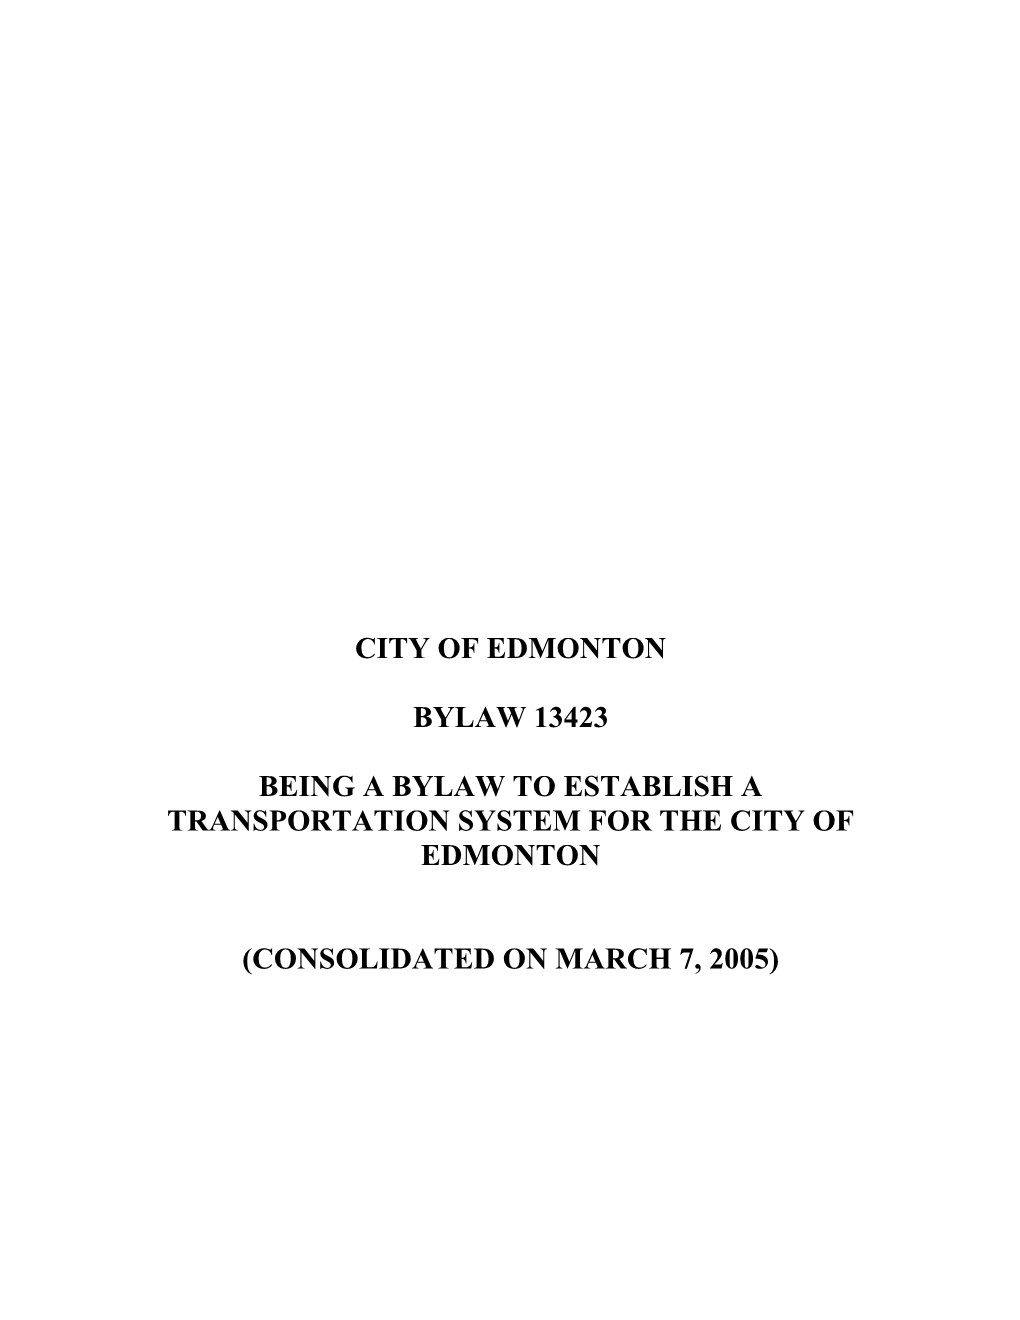 Being a Bylaw to Establish a Transportation System for the City of Edmonton 13423